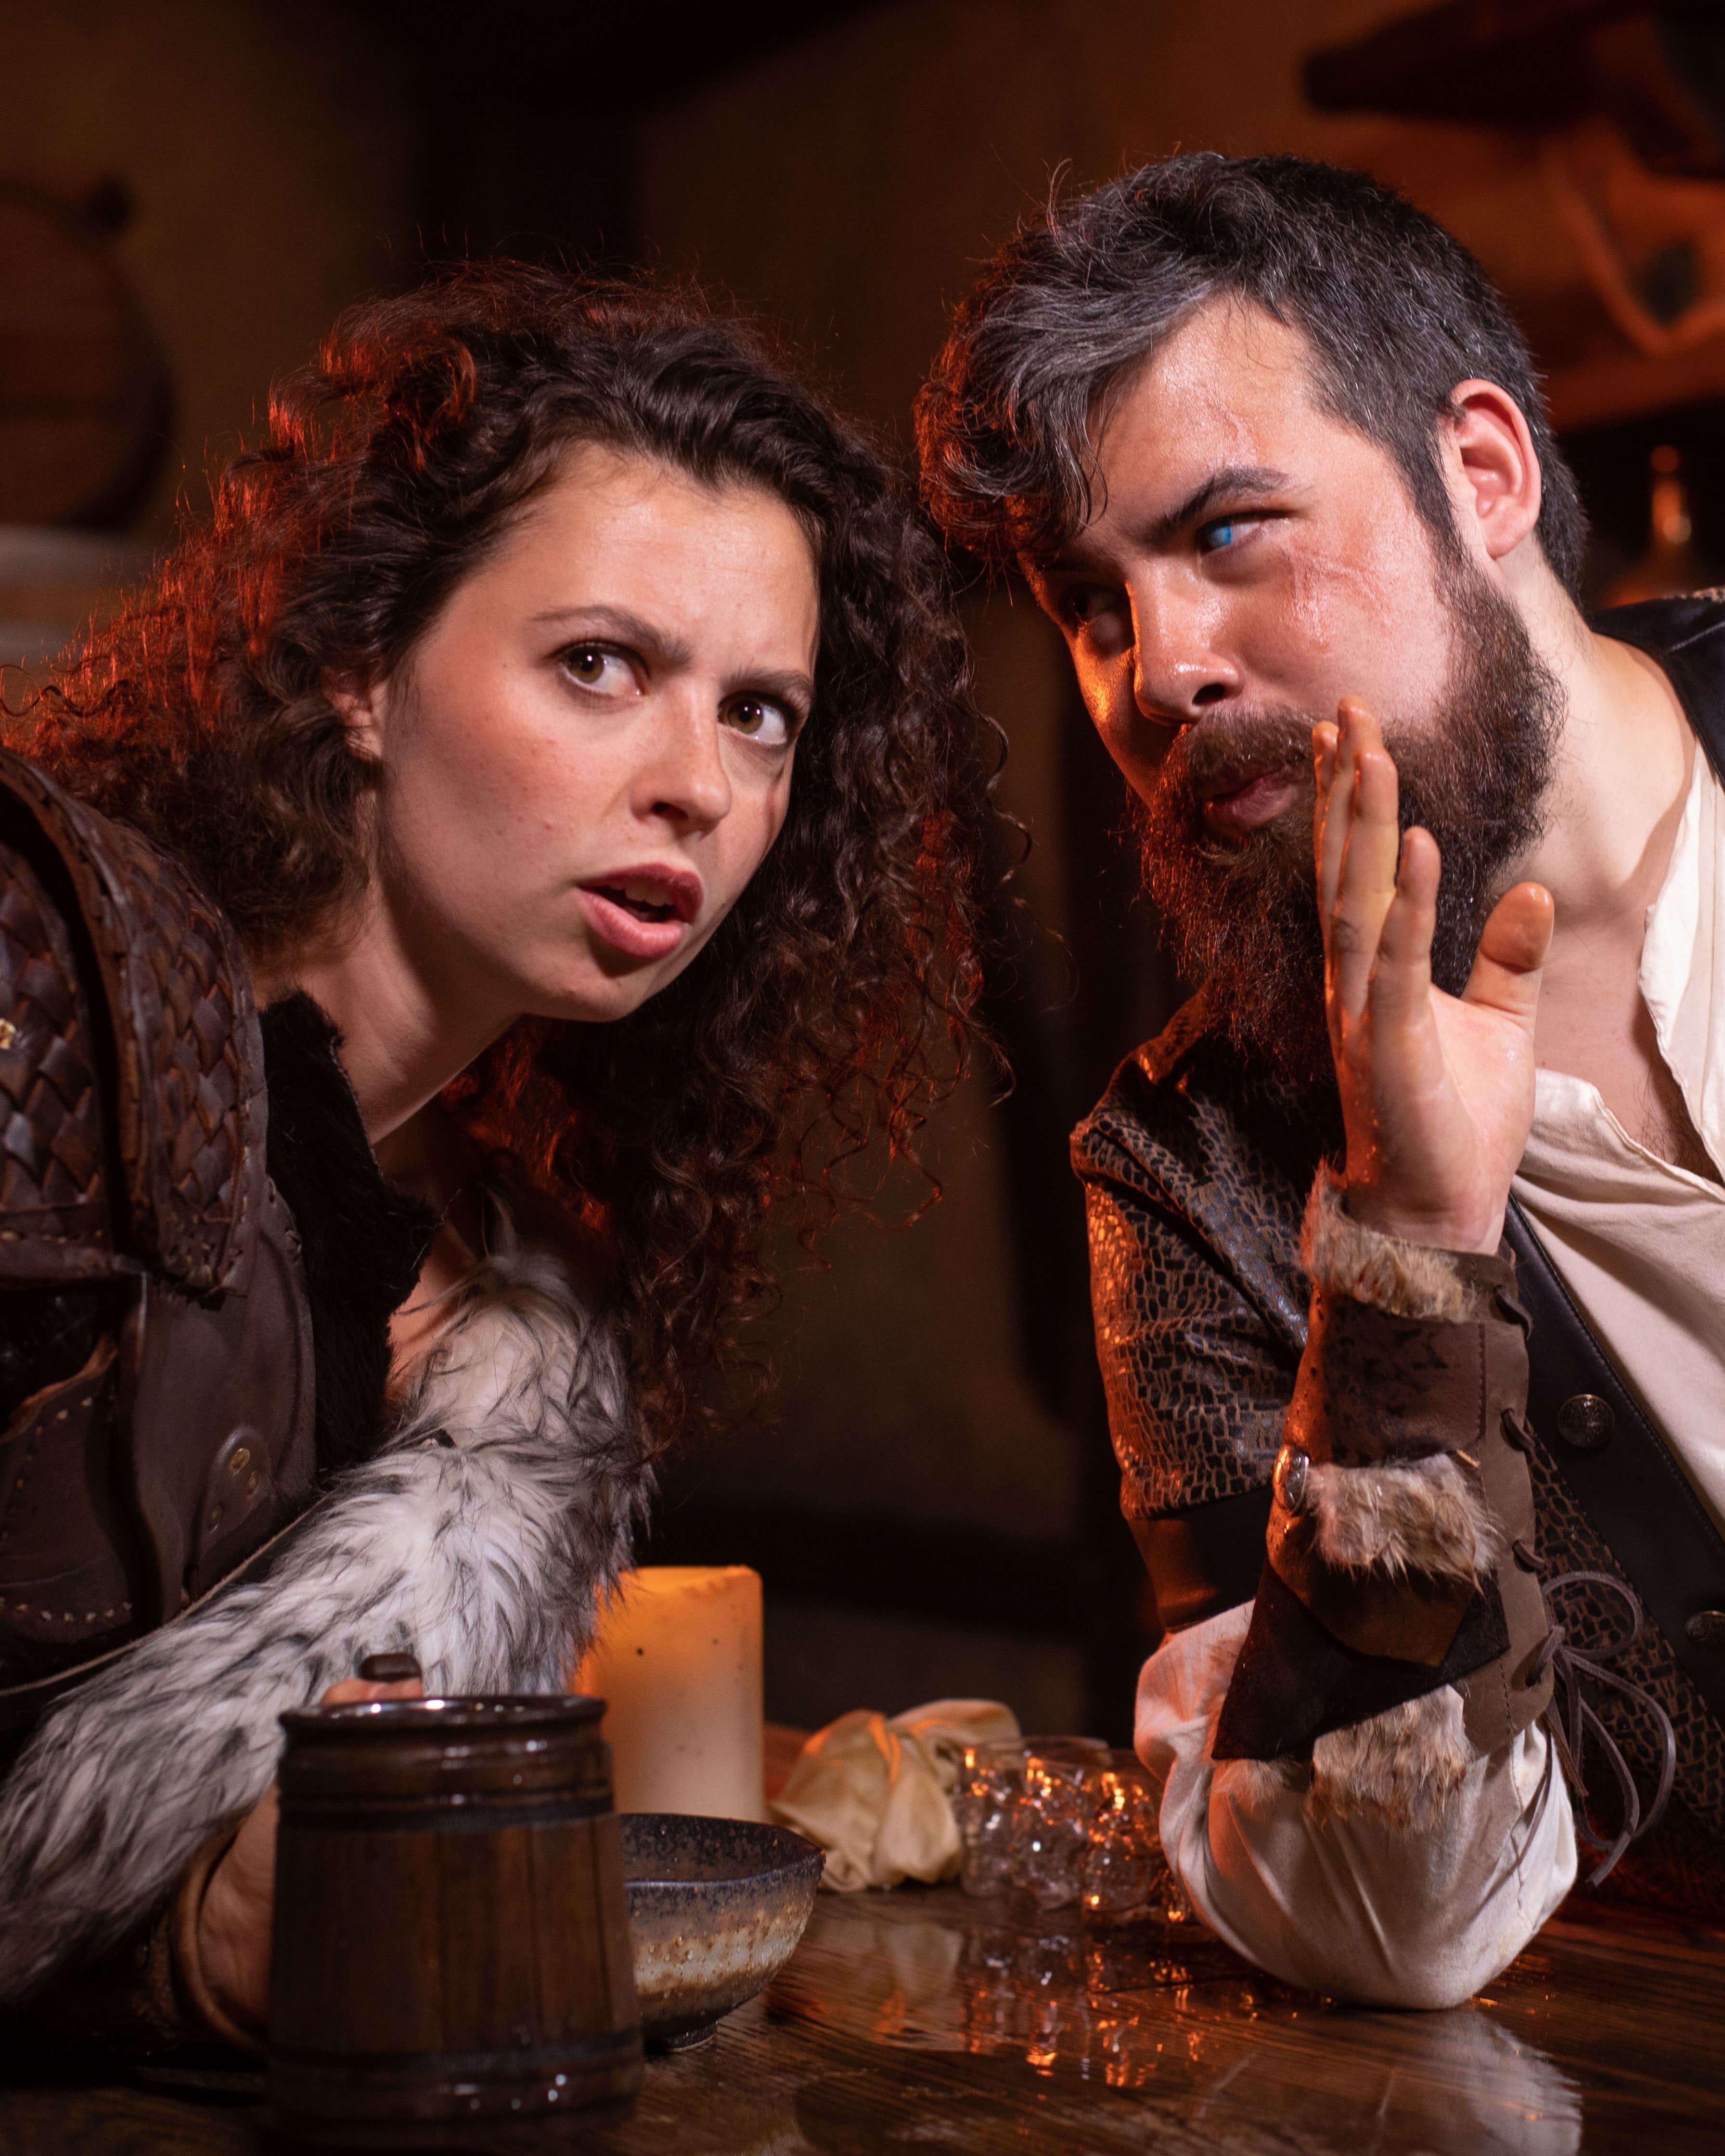 A man and woman in a tavern set in a Dungeons and Dragons story whisper to one another